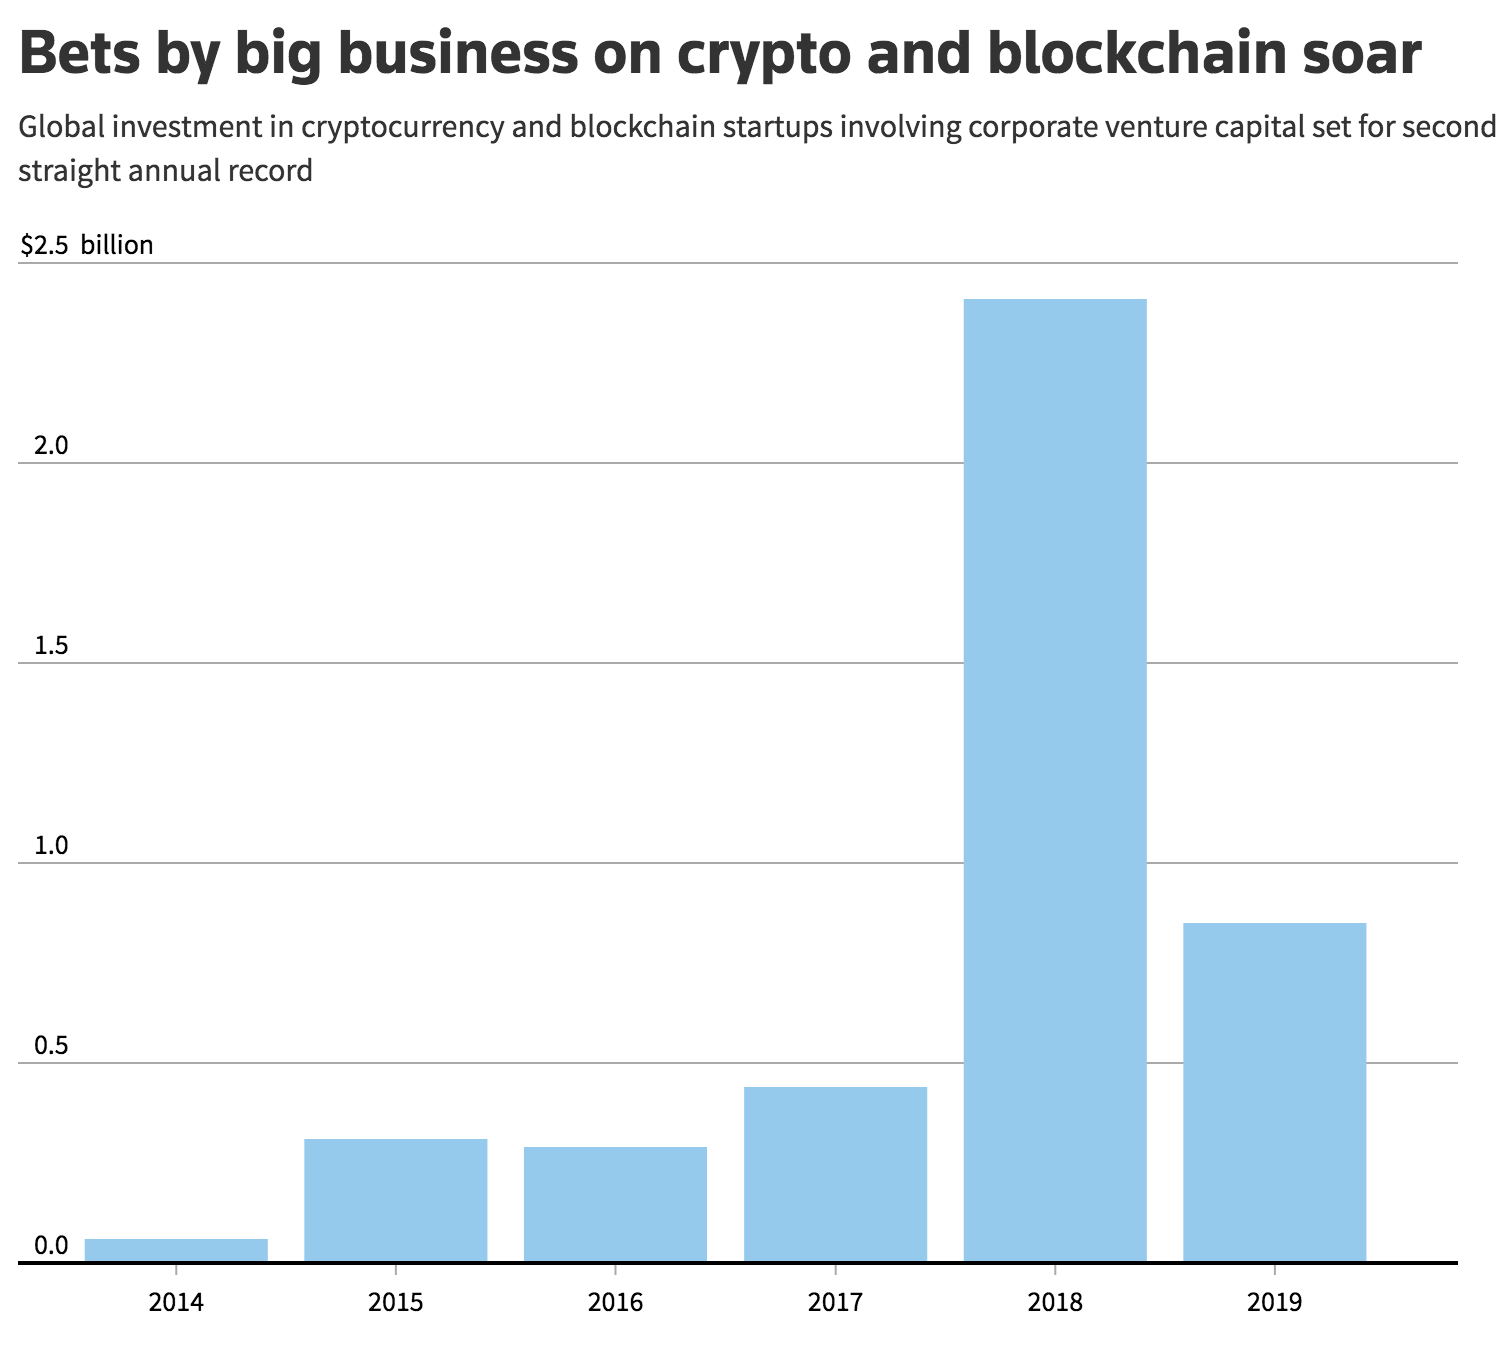 Record level of corporate investment into crypto